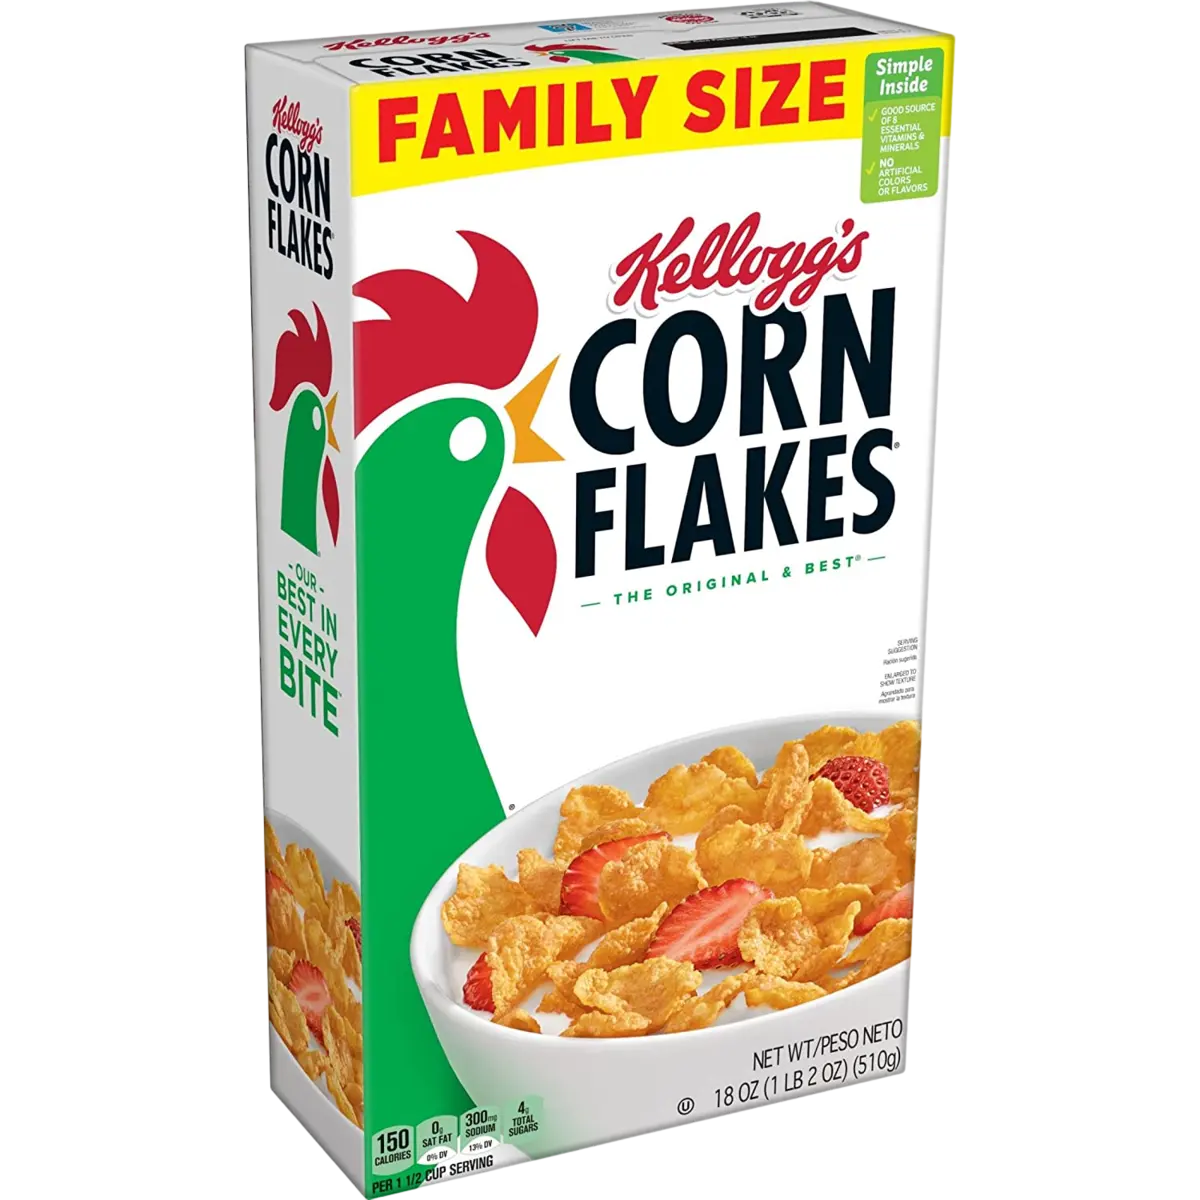 Kellogg’s Corn Flakes Cold Breakfast Cereal, 8 Vitamins and Minerals, Healthy Snacks, Family Size, Original